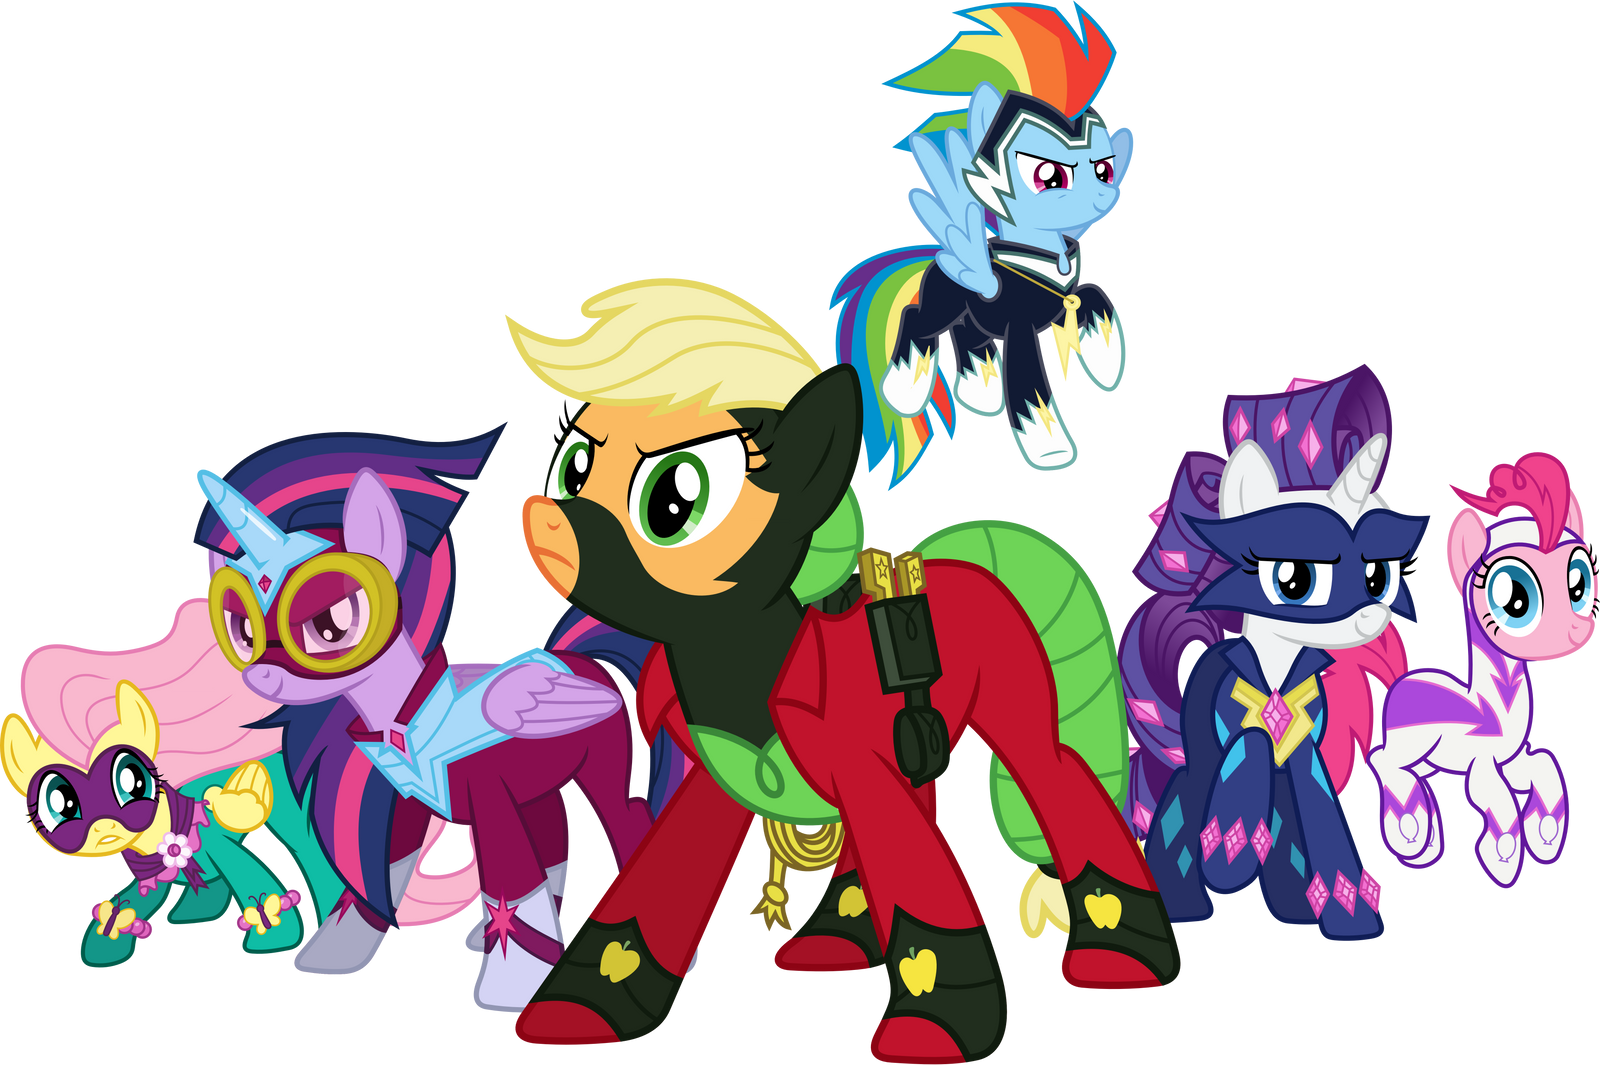 [Bild: the_power_ponies_by_90sigma-d6z8d2y.png]